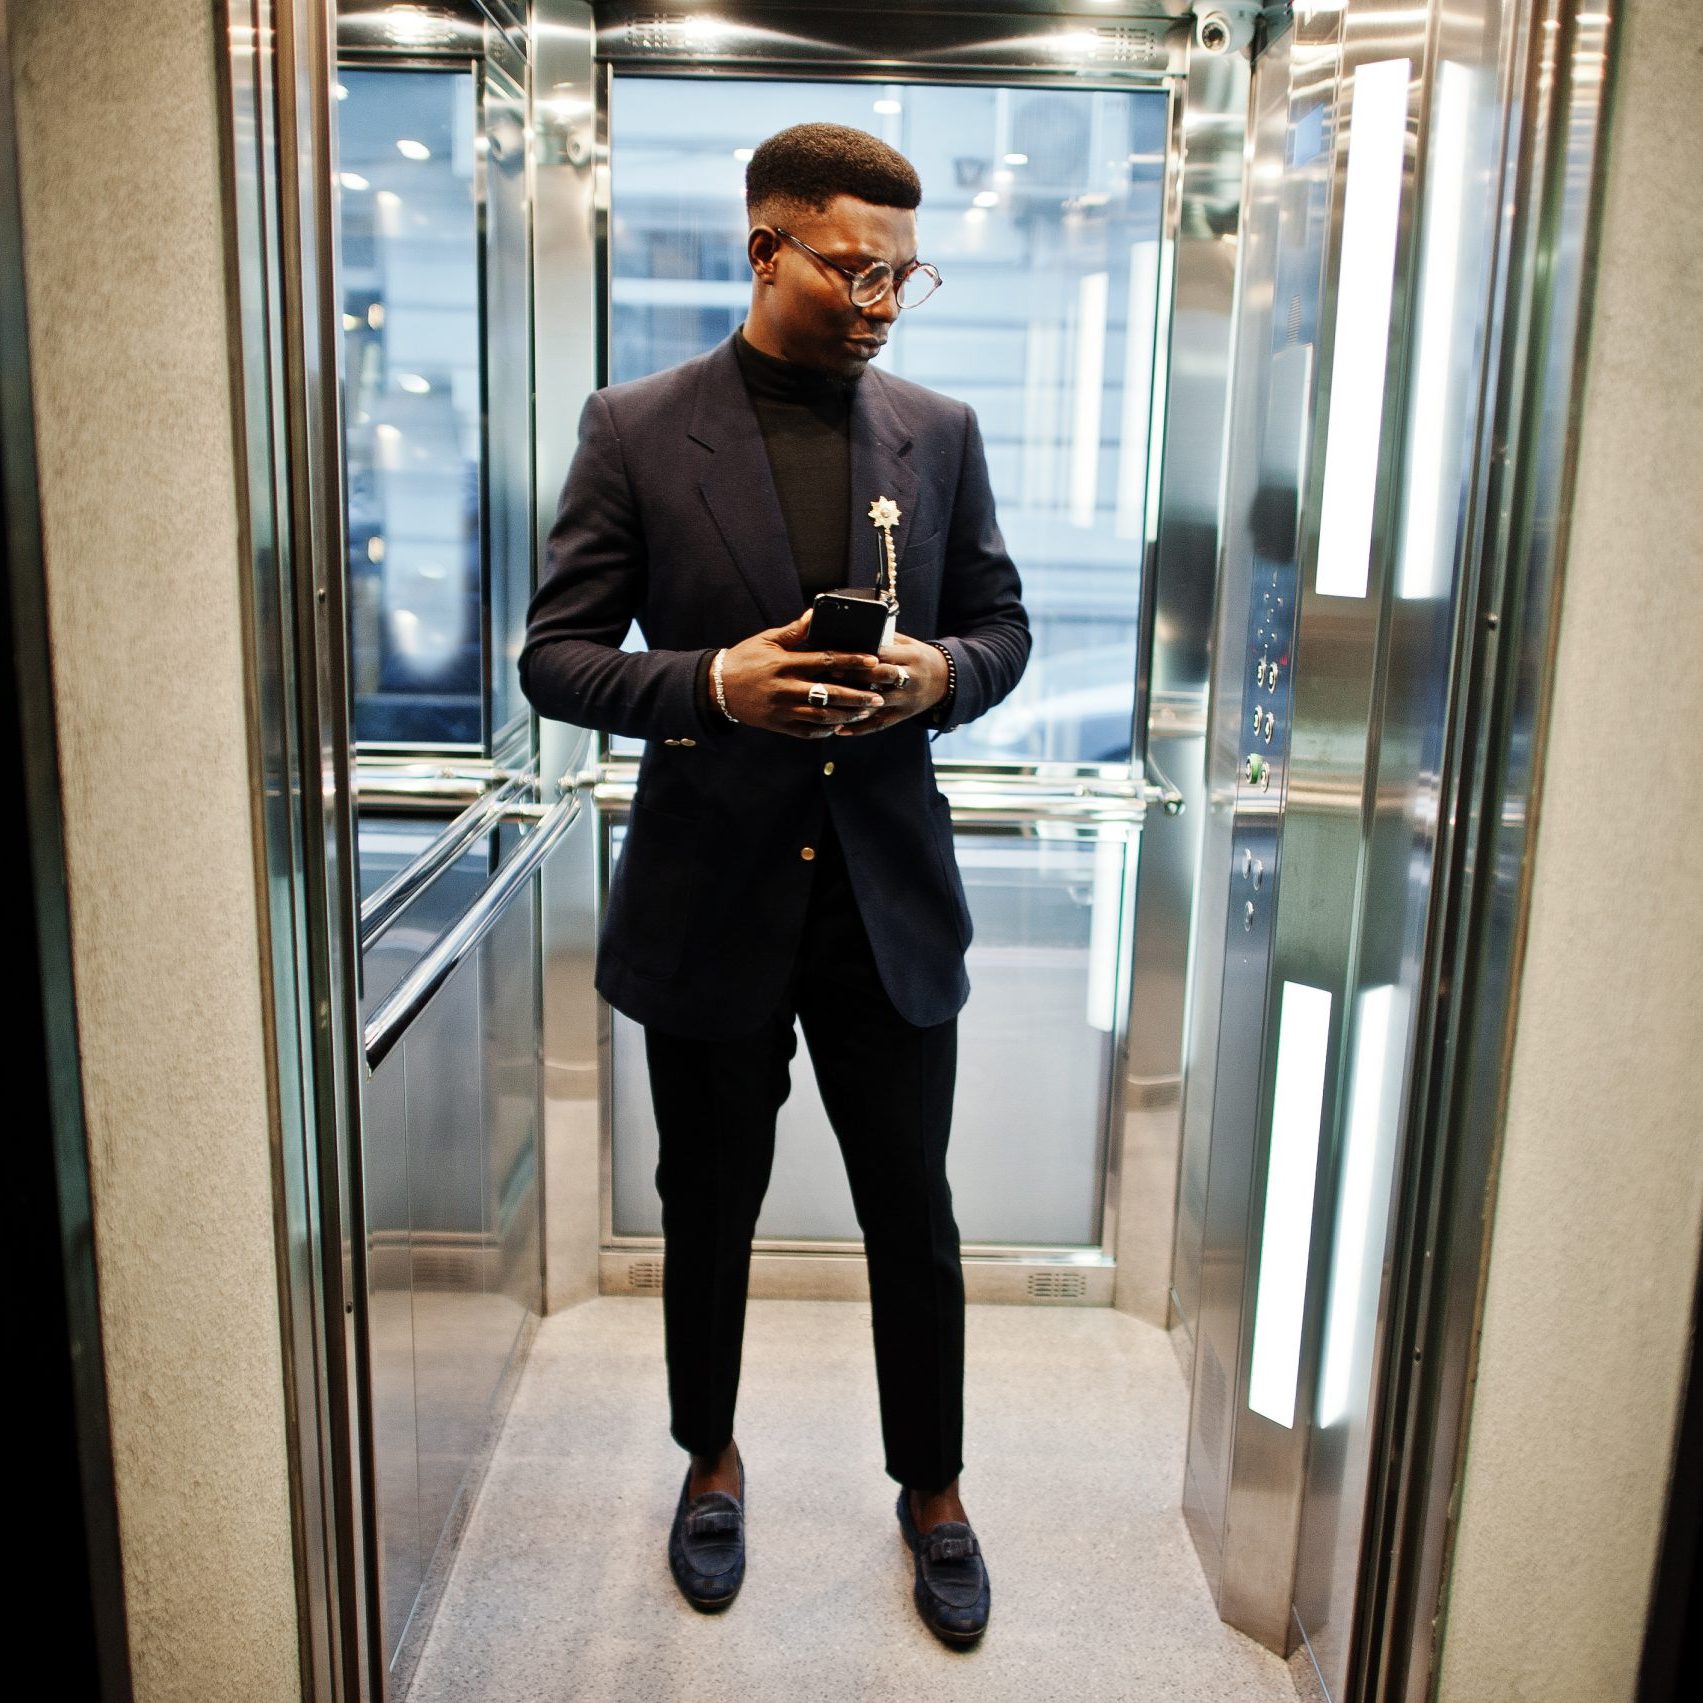 Fashionable african american man in suit and glasses with mobile phone and cup of coffee at hands posed inside elevator.